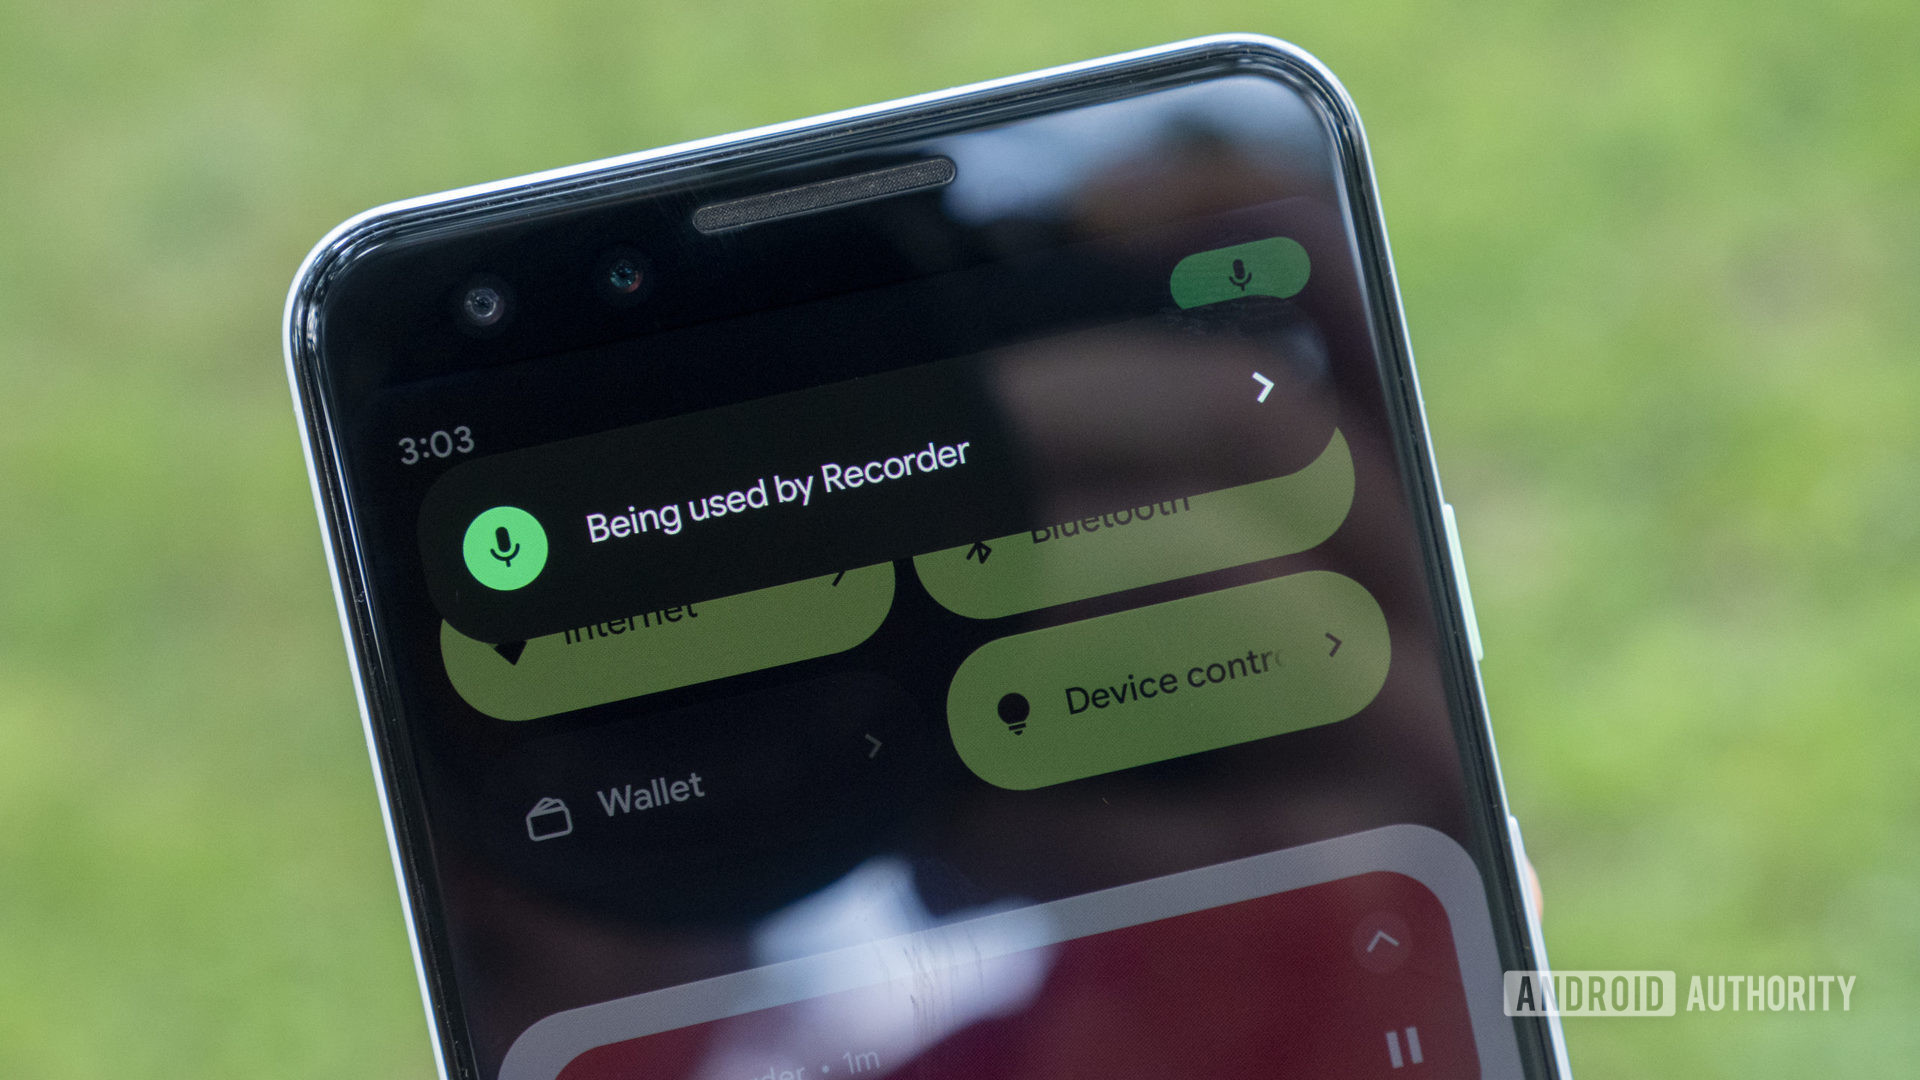 android 12 beta 2 privacy microphone indicator being used by recorder message